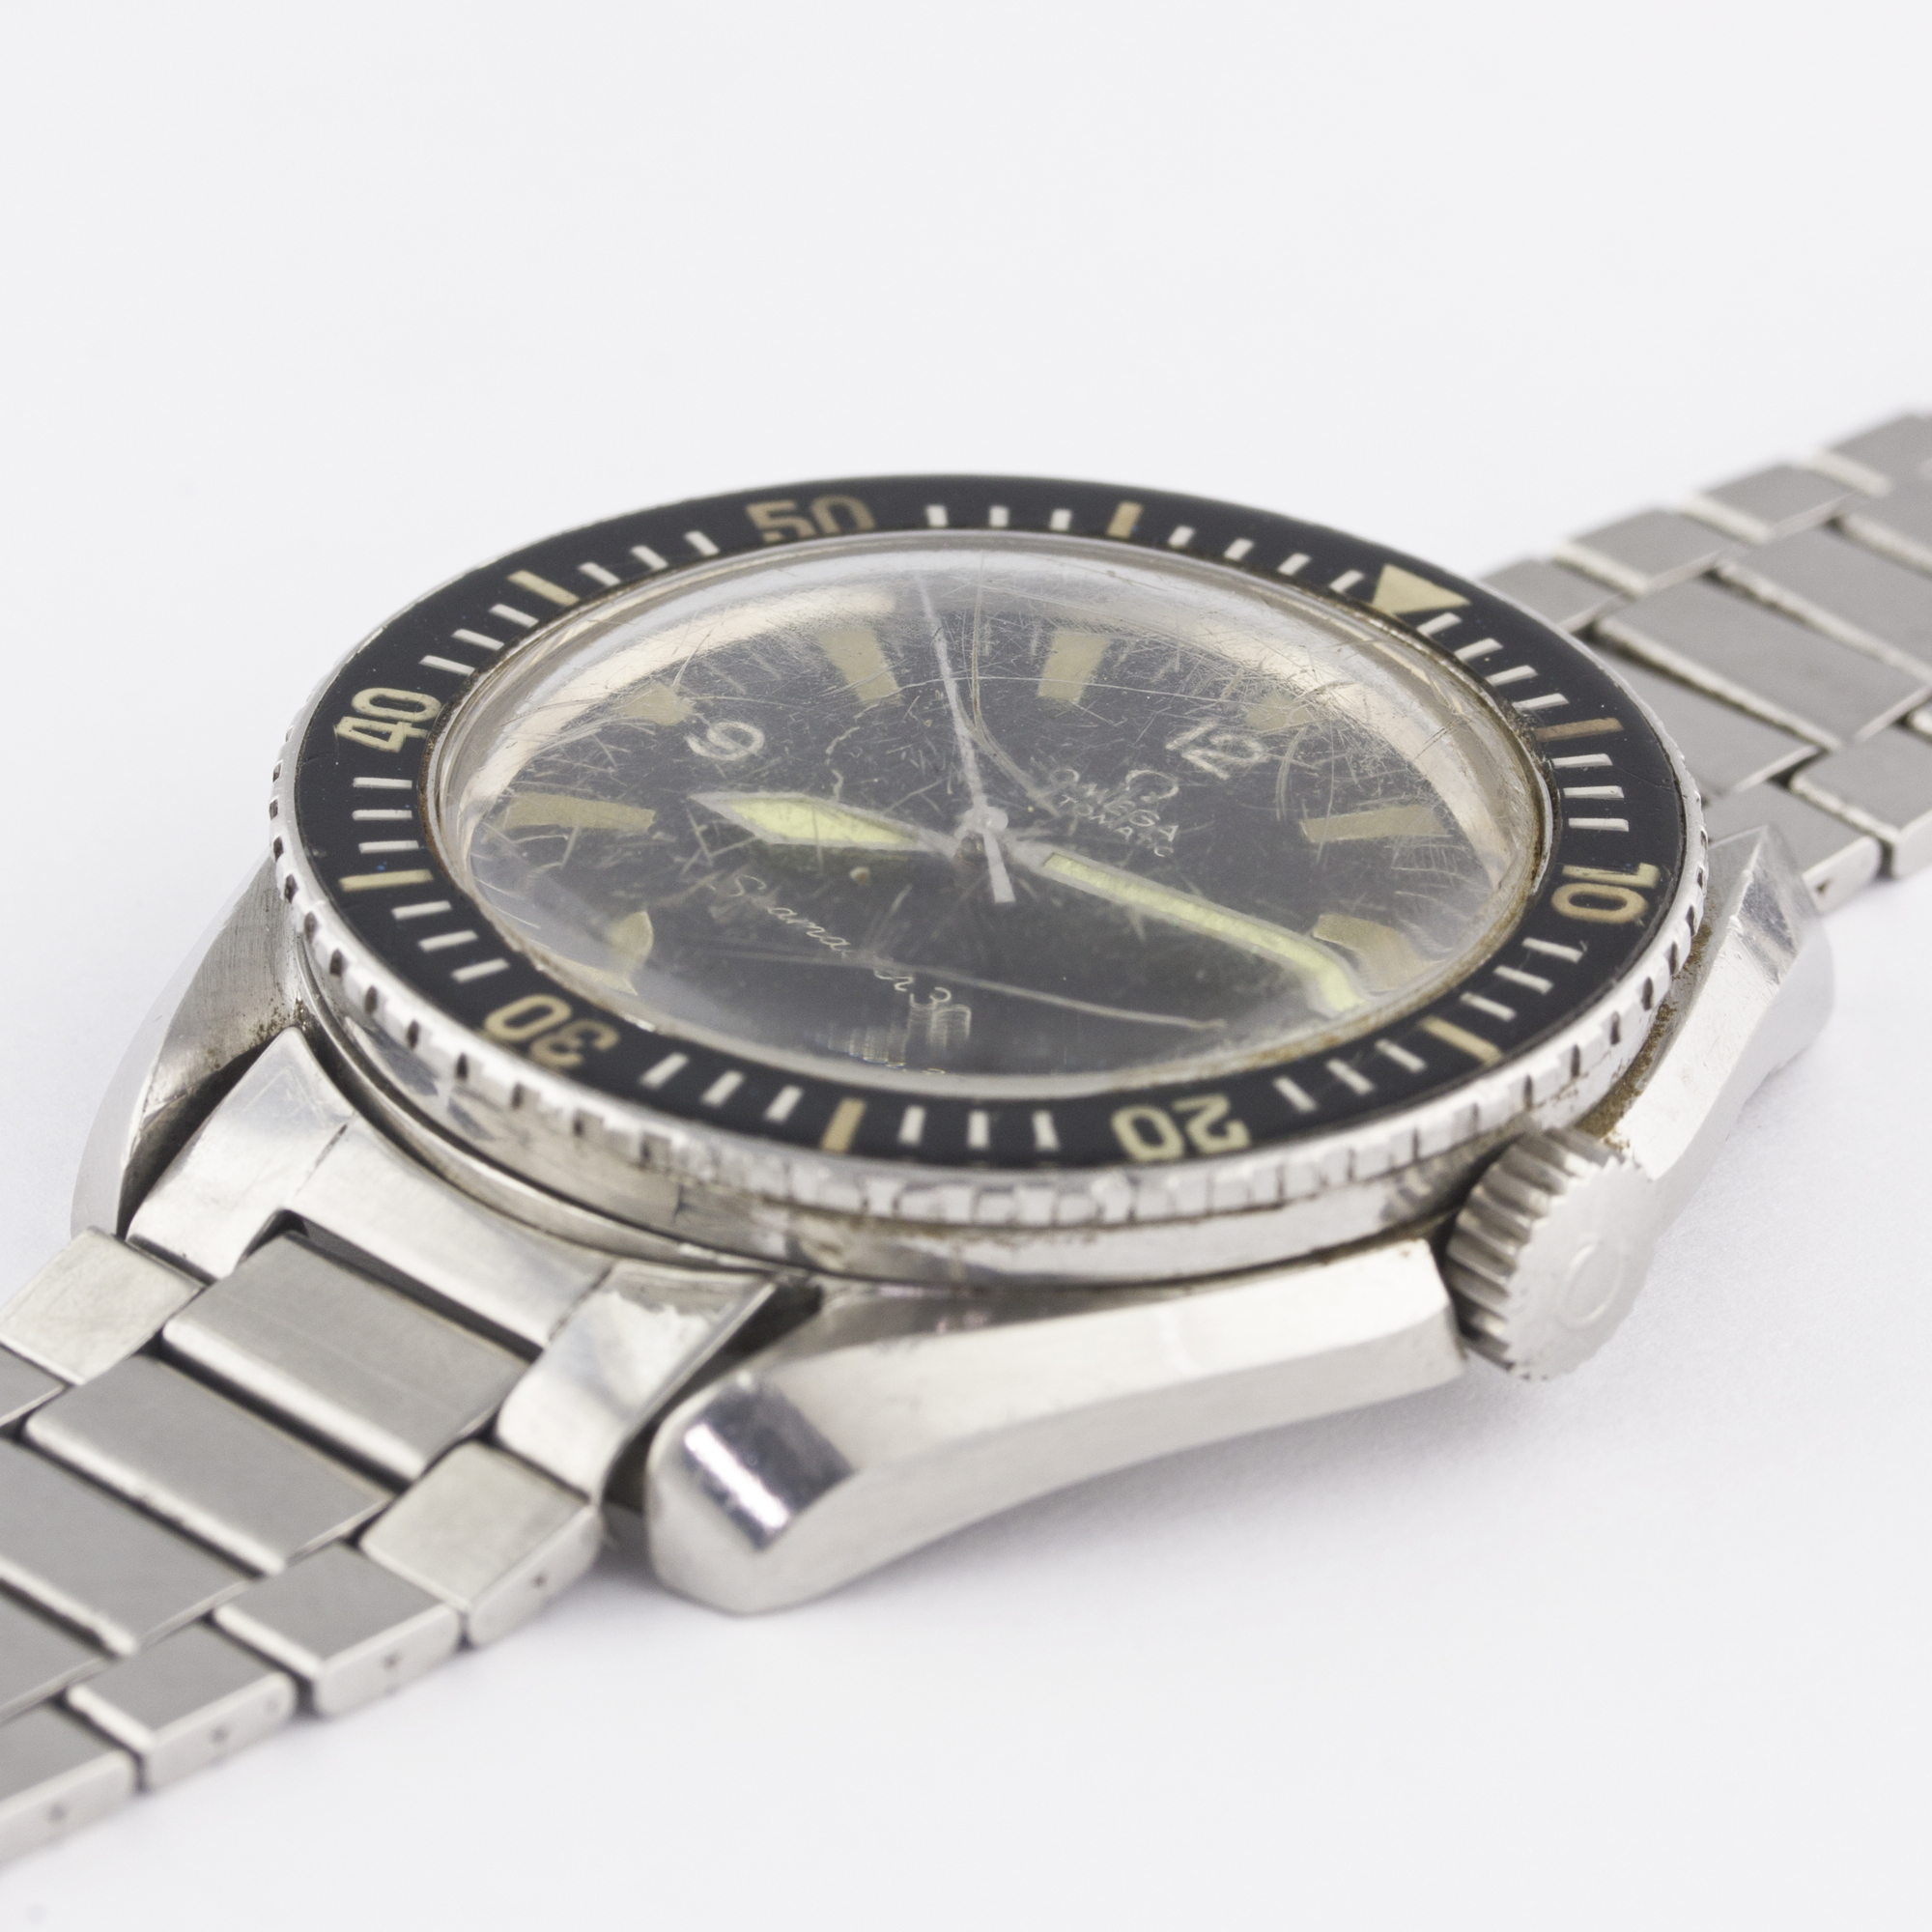 A RARE GENTLEMAN'S STAINLESS STEEL OMEGA SEAMASTER 300 BRACELET WATCH CIRCA 1967, REF. 165024 - Image 4 of 8